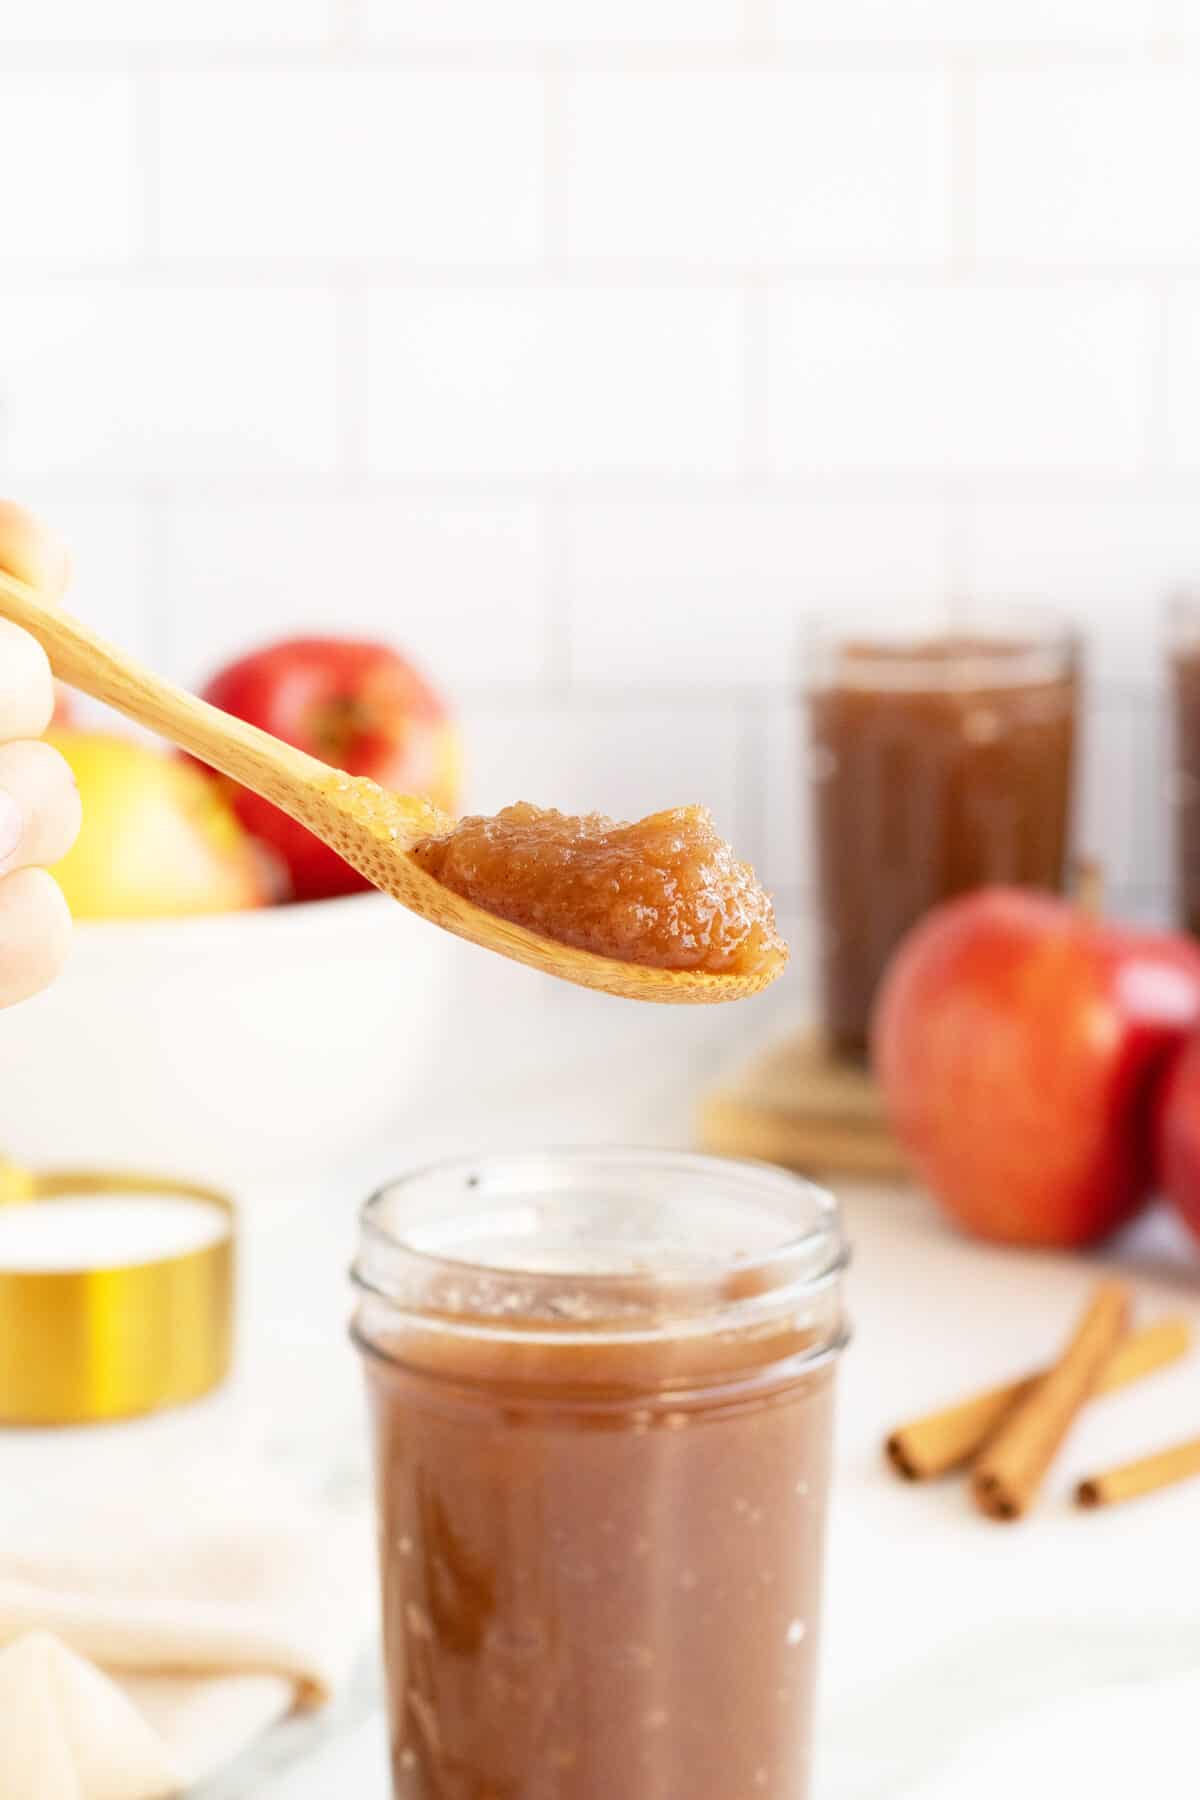 apple butter in a spoon over a jar